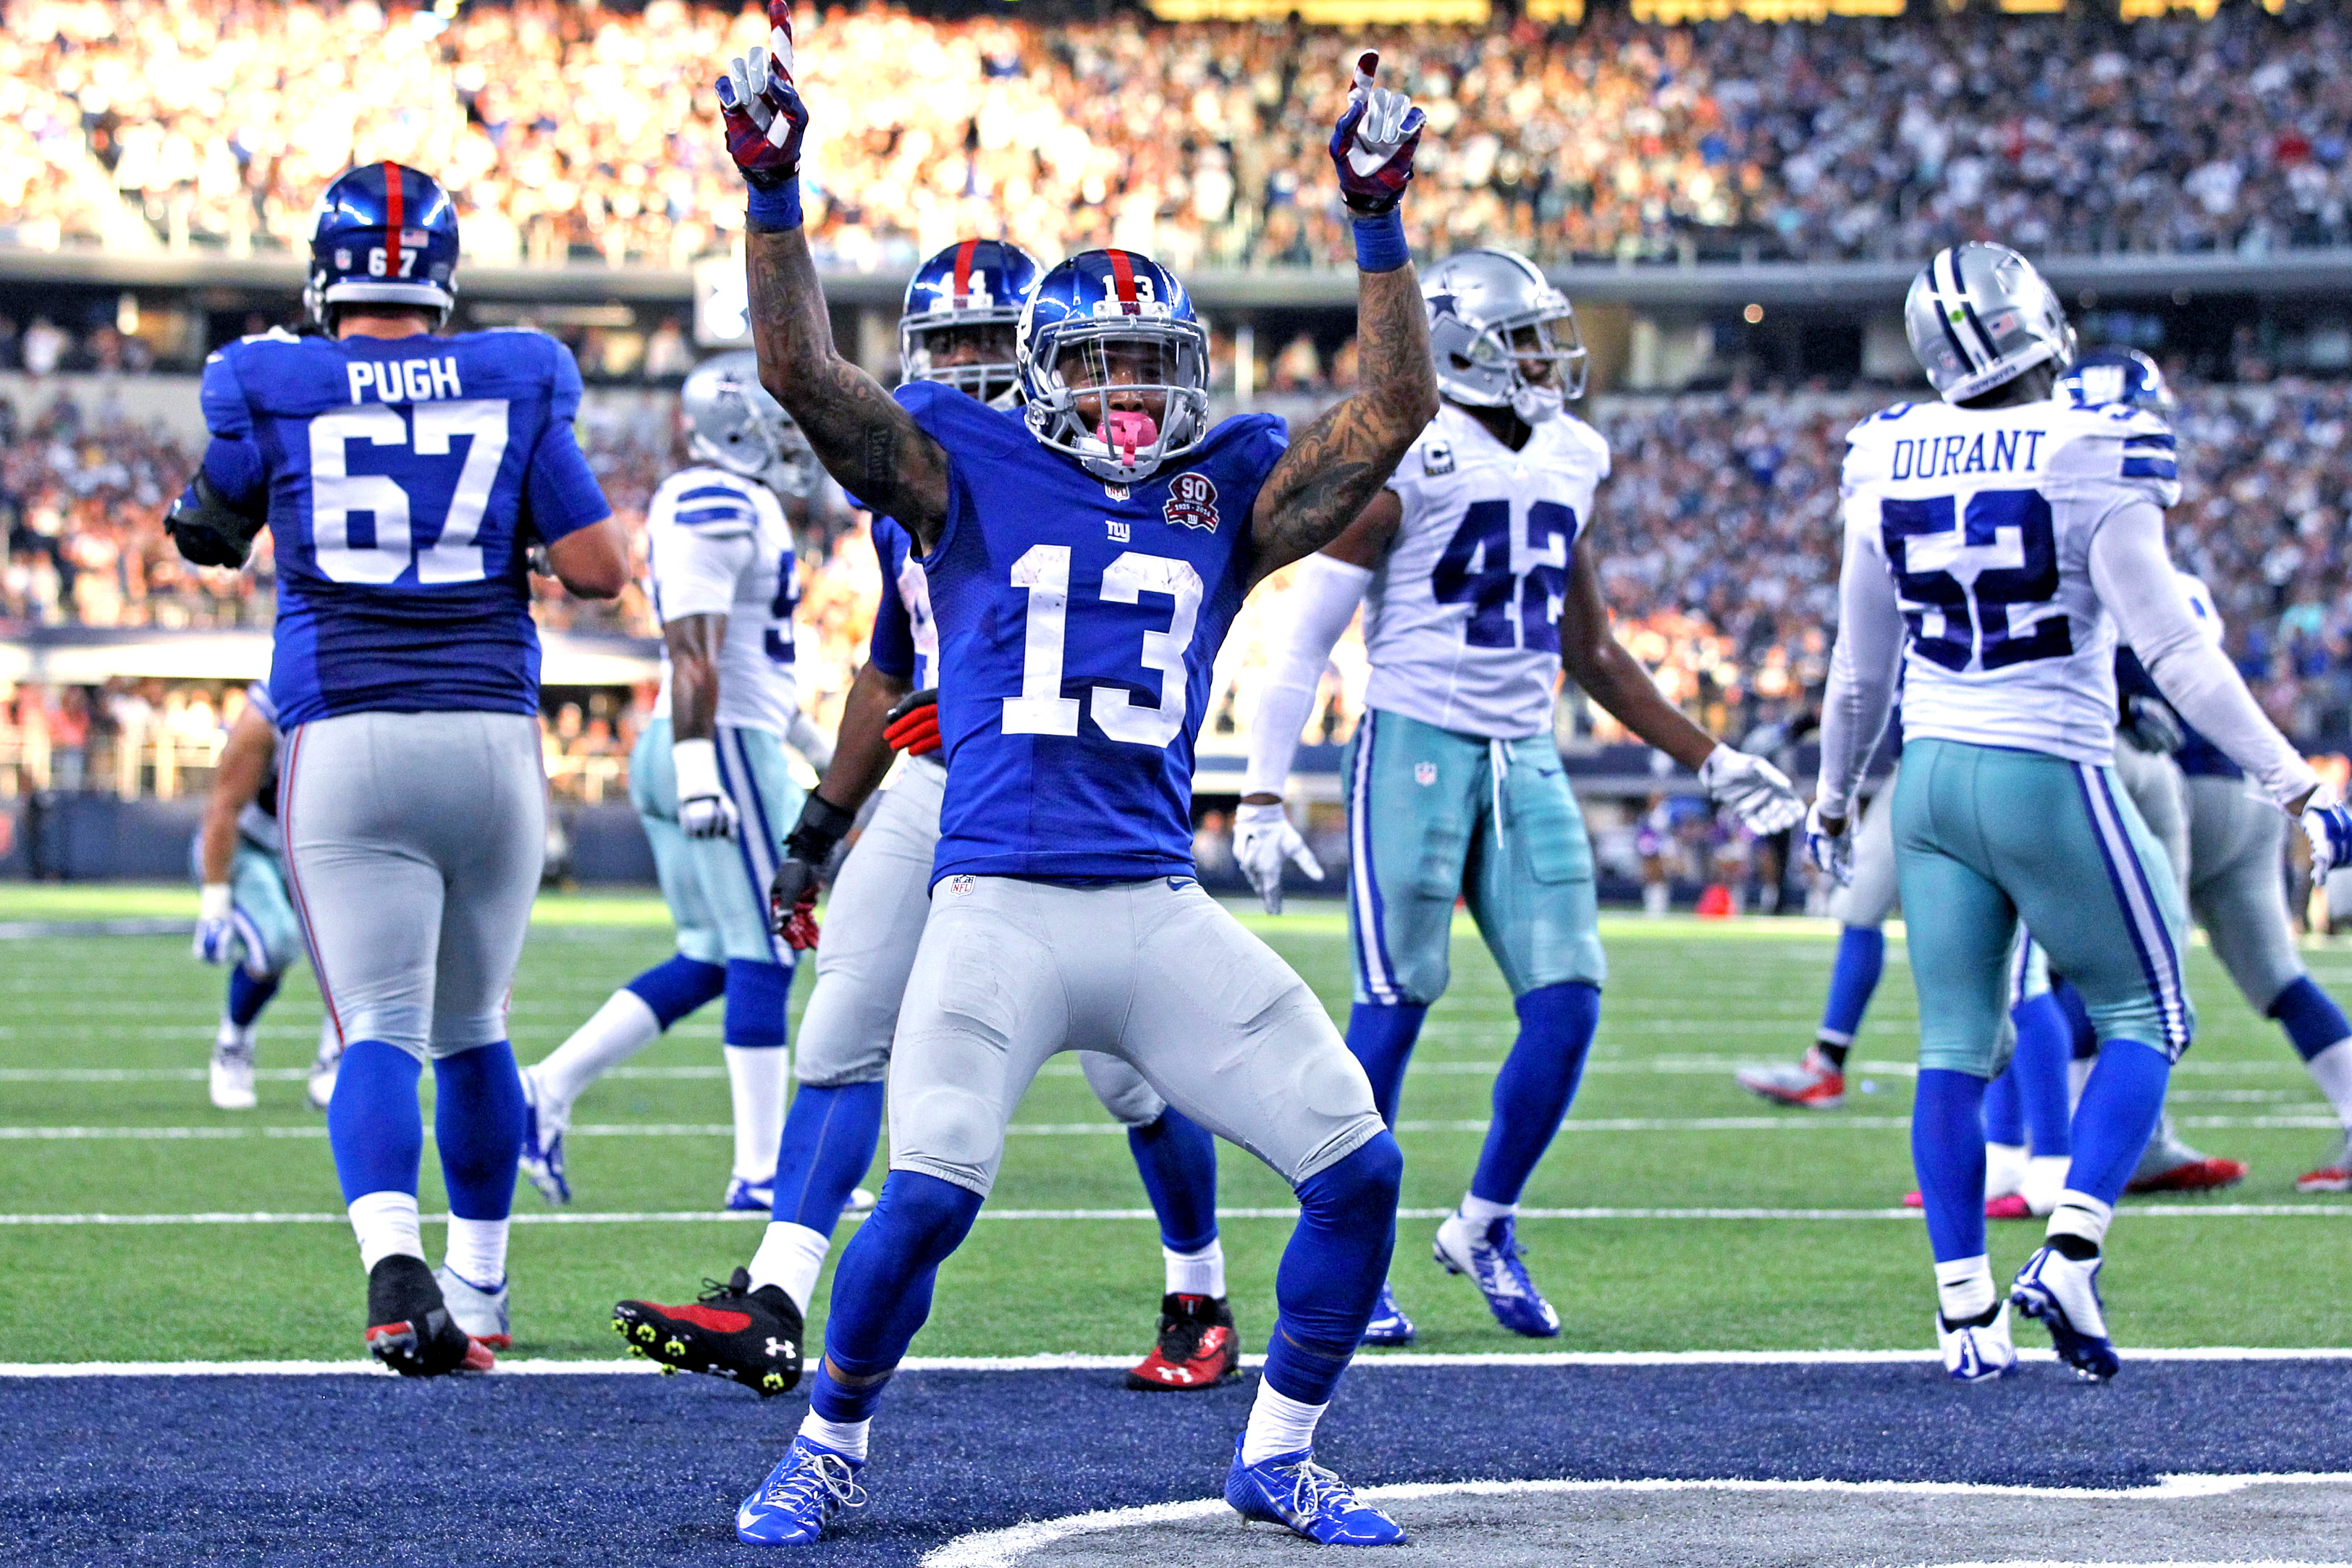 Odell Beckham Celebrates A ToucHDown Against The Cowboys Last Week